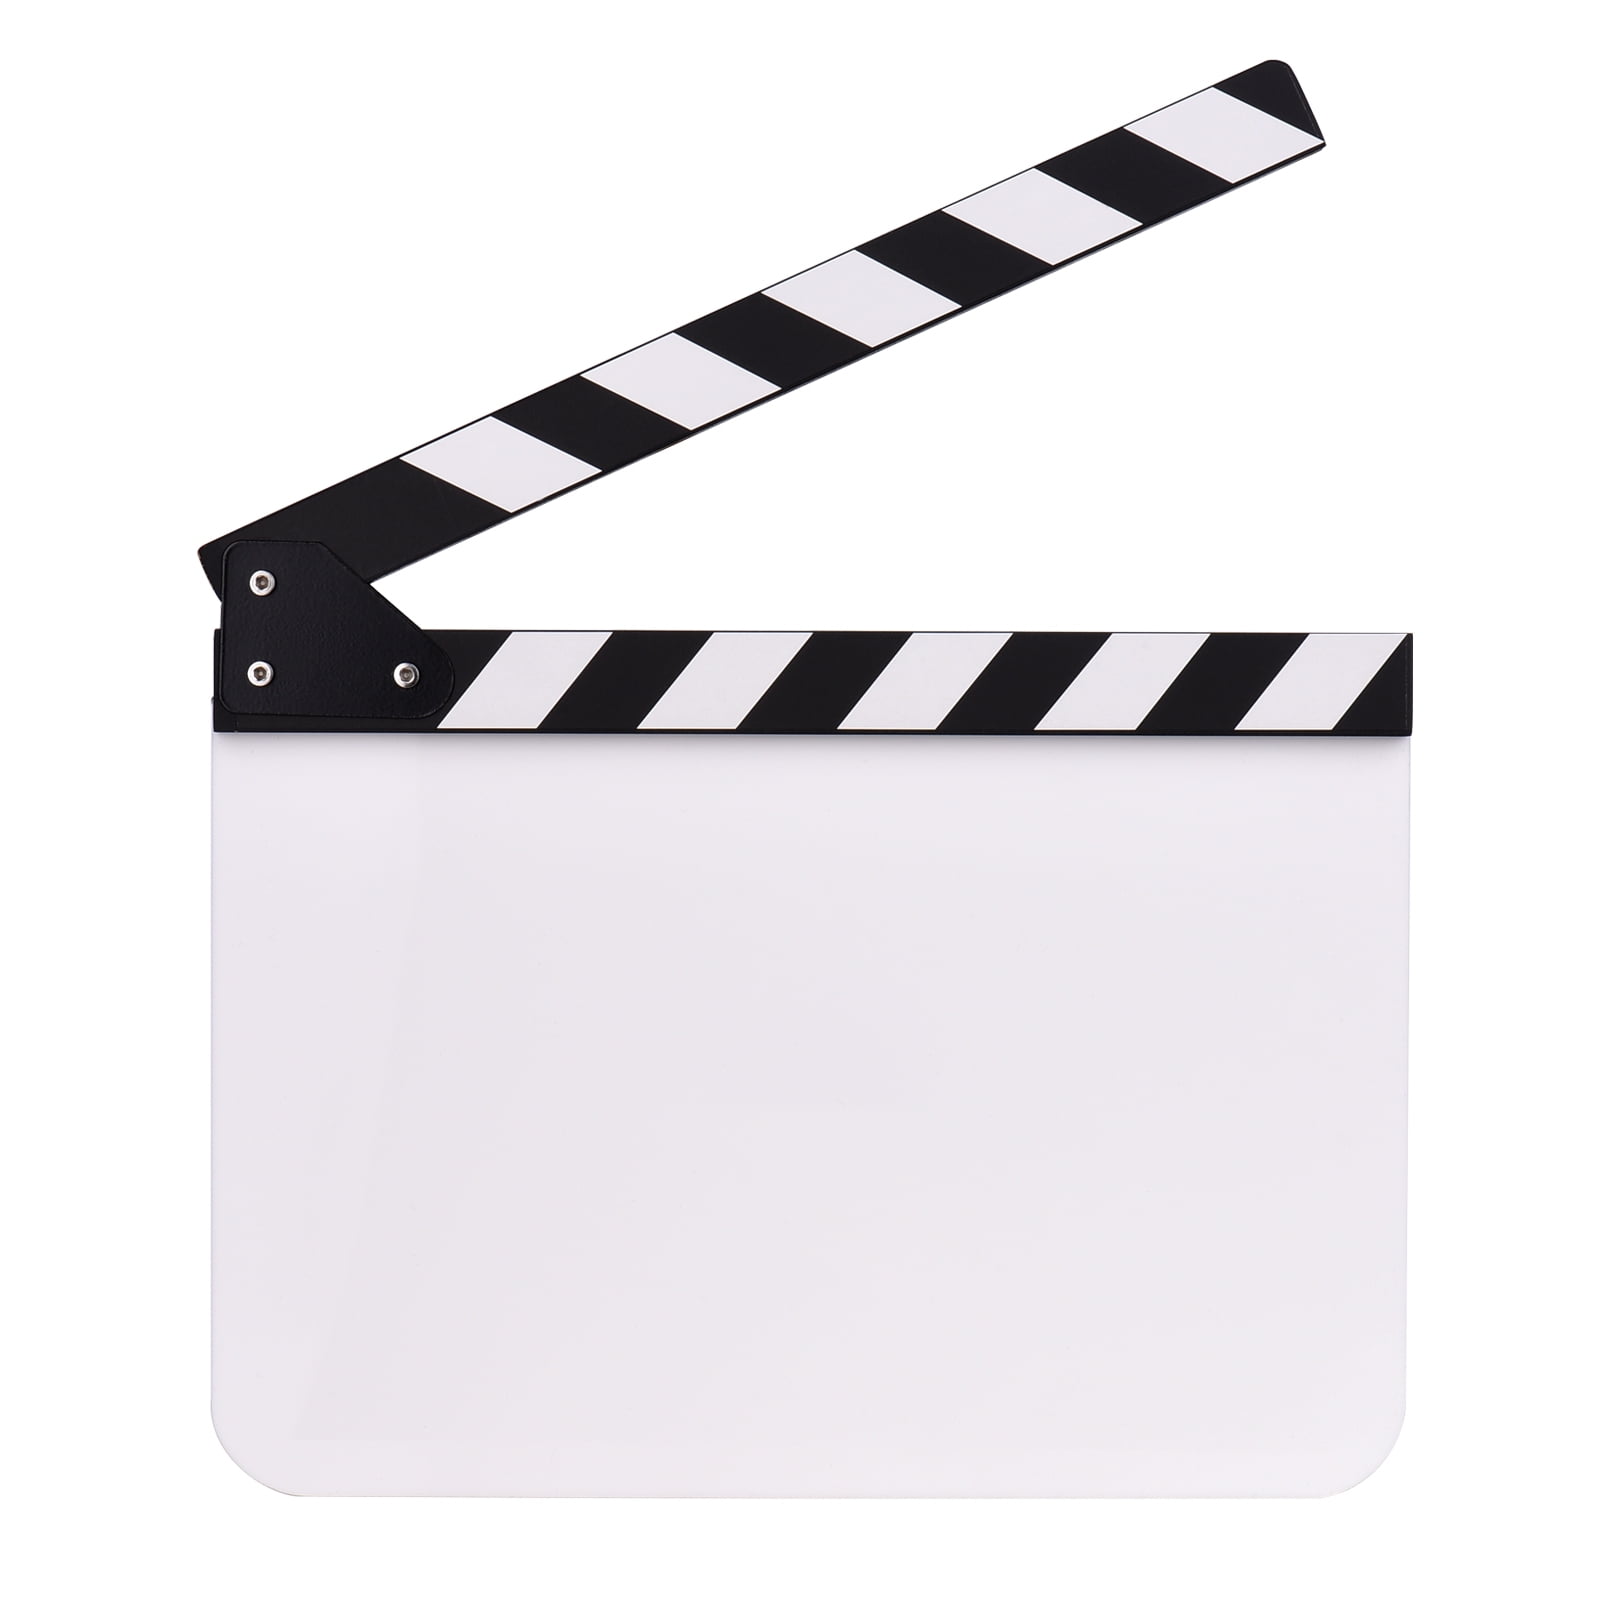 11.8 x 9.8 x 0.7 Inch Acouto Acrylic Film Clap Board White Director Scene Clapboard TV Movie Action Board Film Cut Prop with Pen 